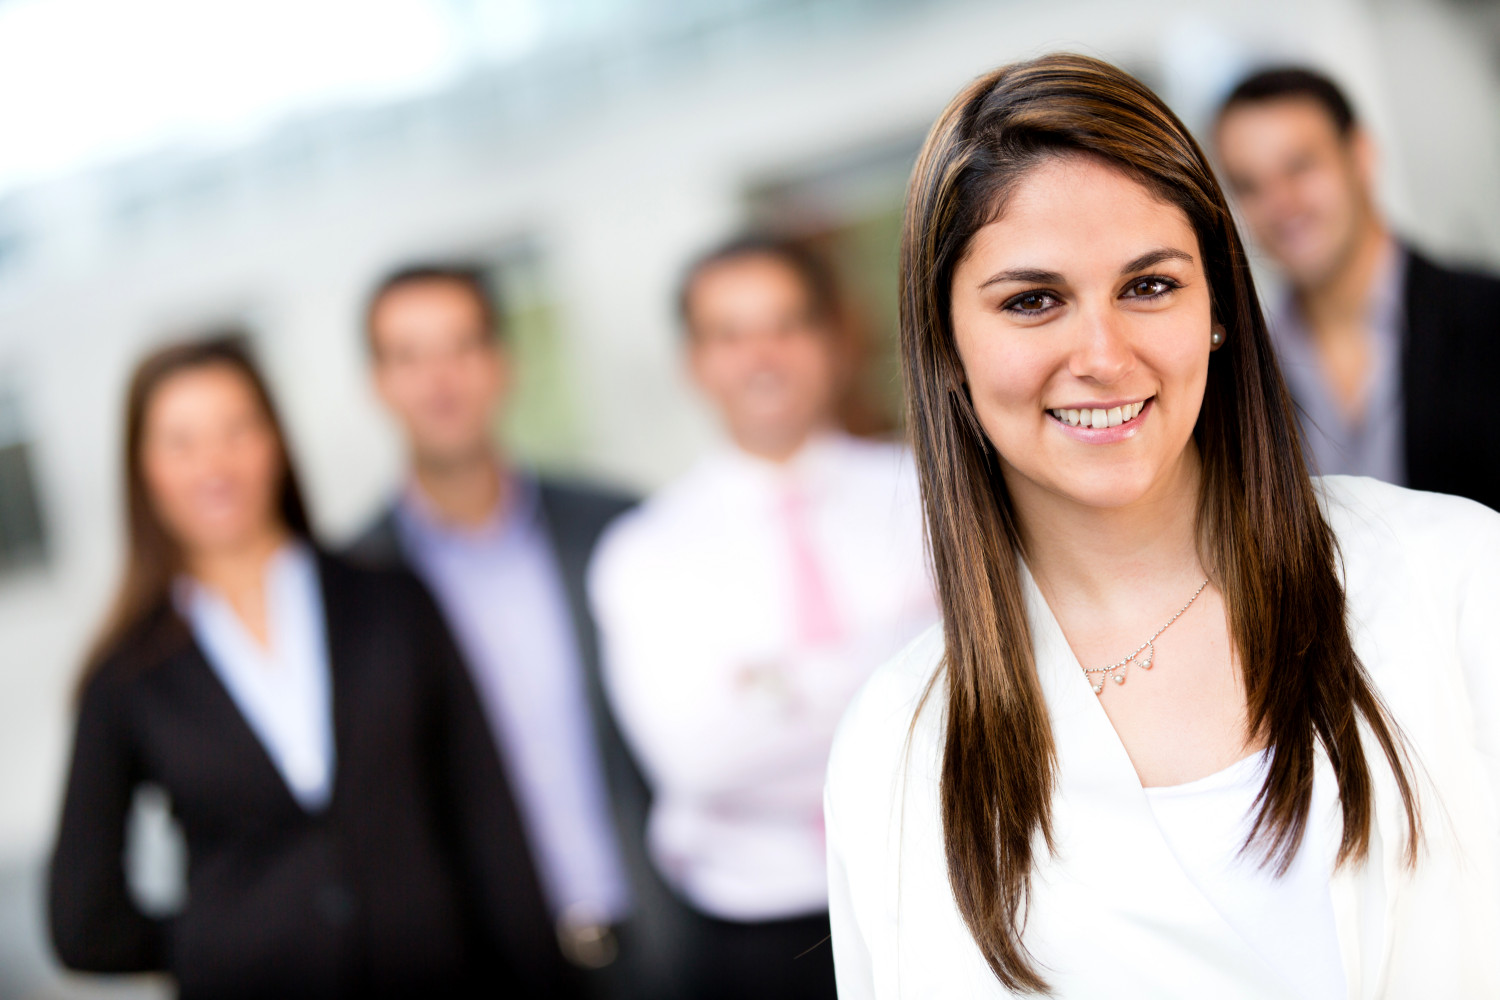 Woman leading a business group